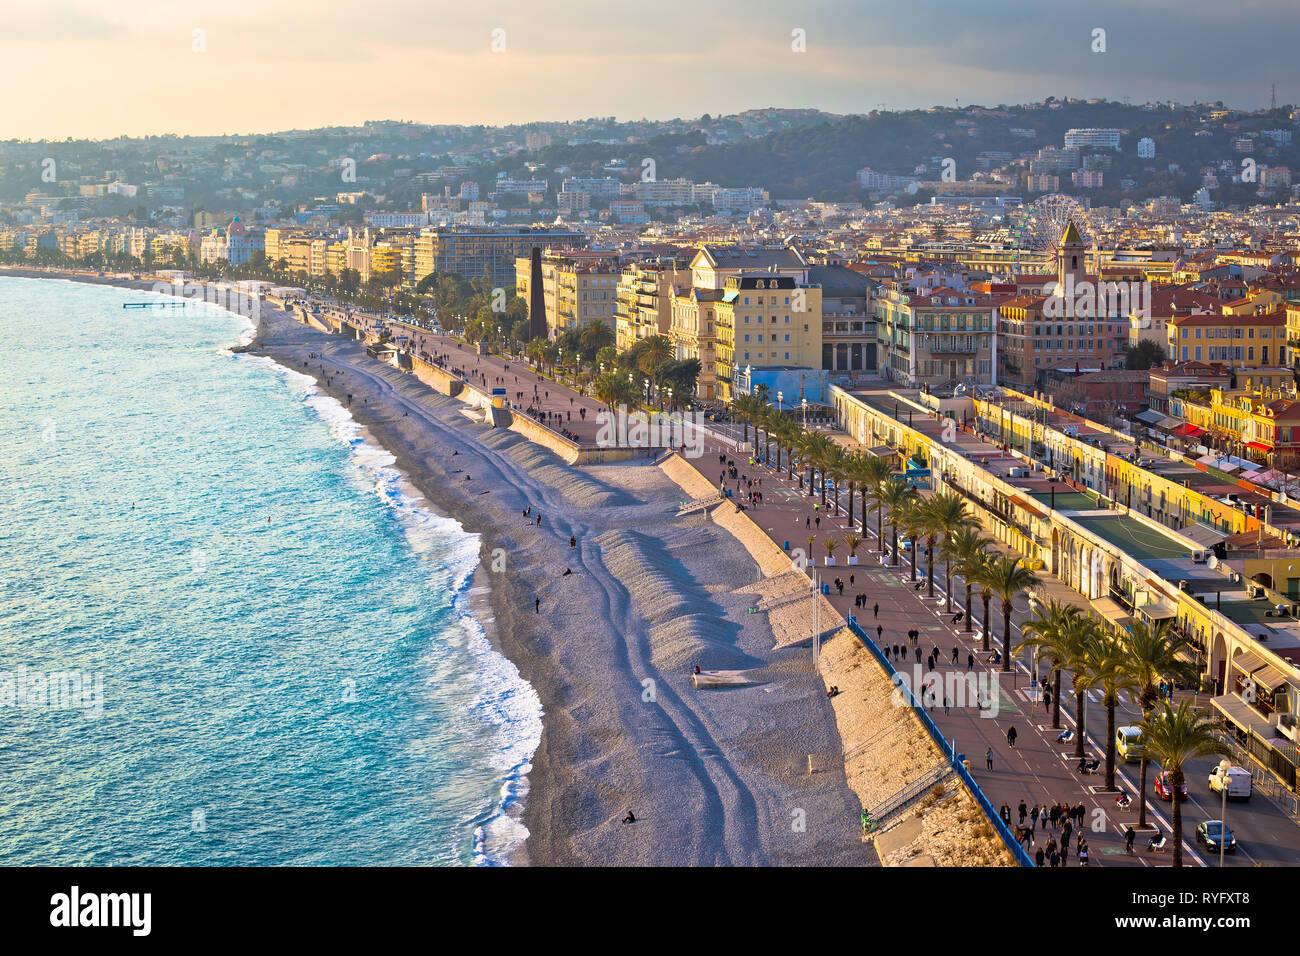 City of Nice Promenade des Anglais waterfront and beach view, French riviera, Alpes Maritimes department of France Stock Photo